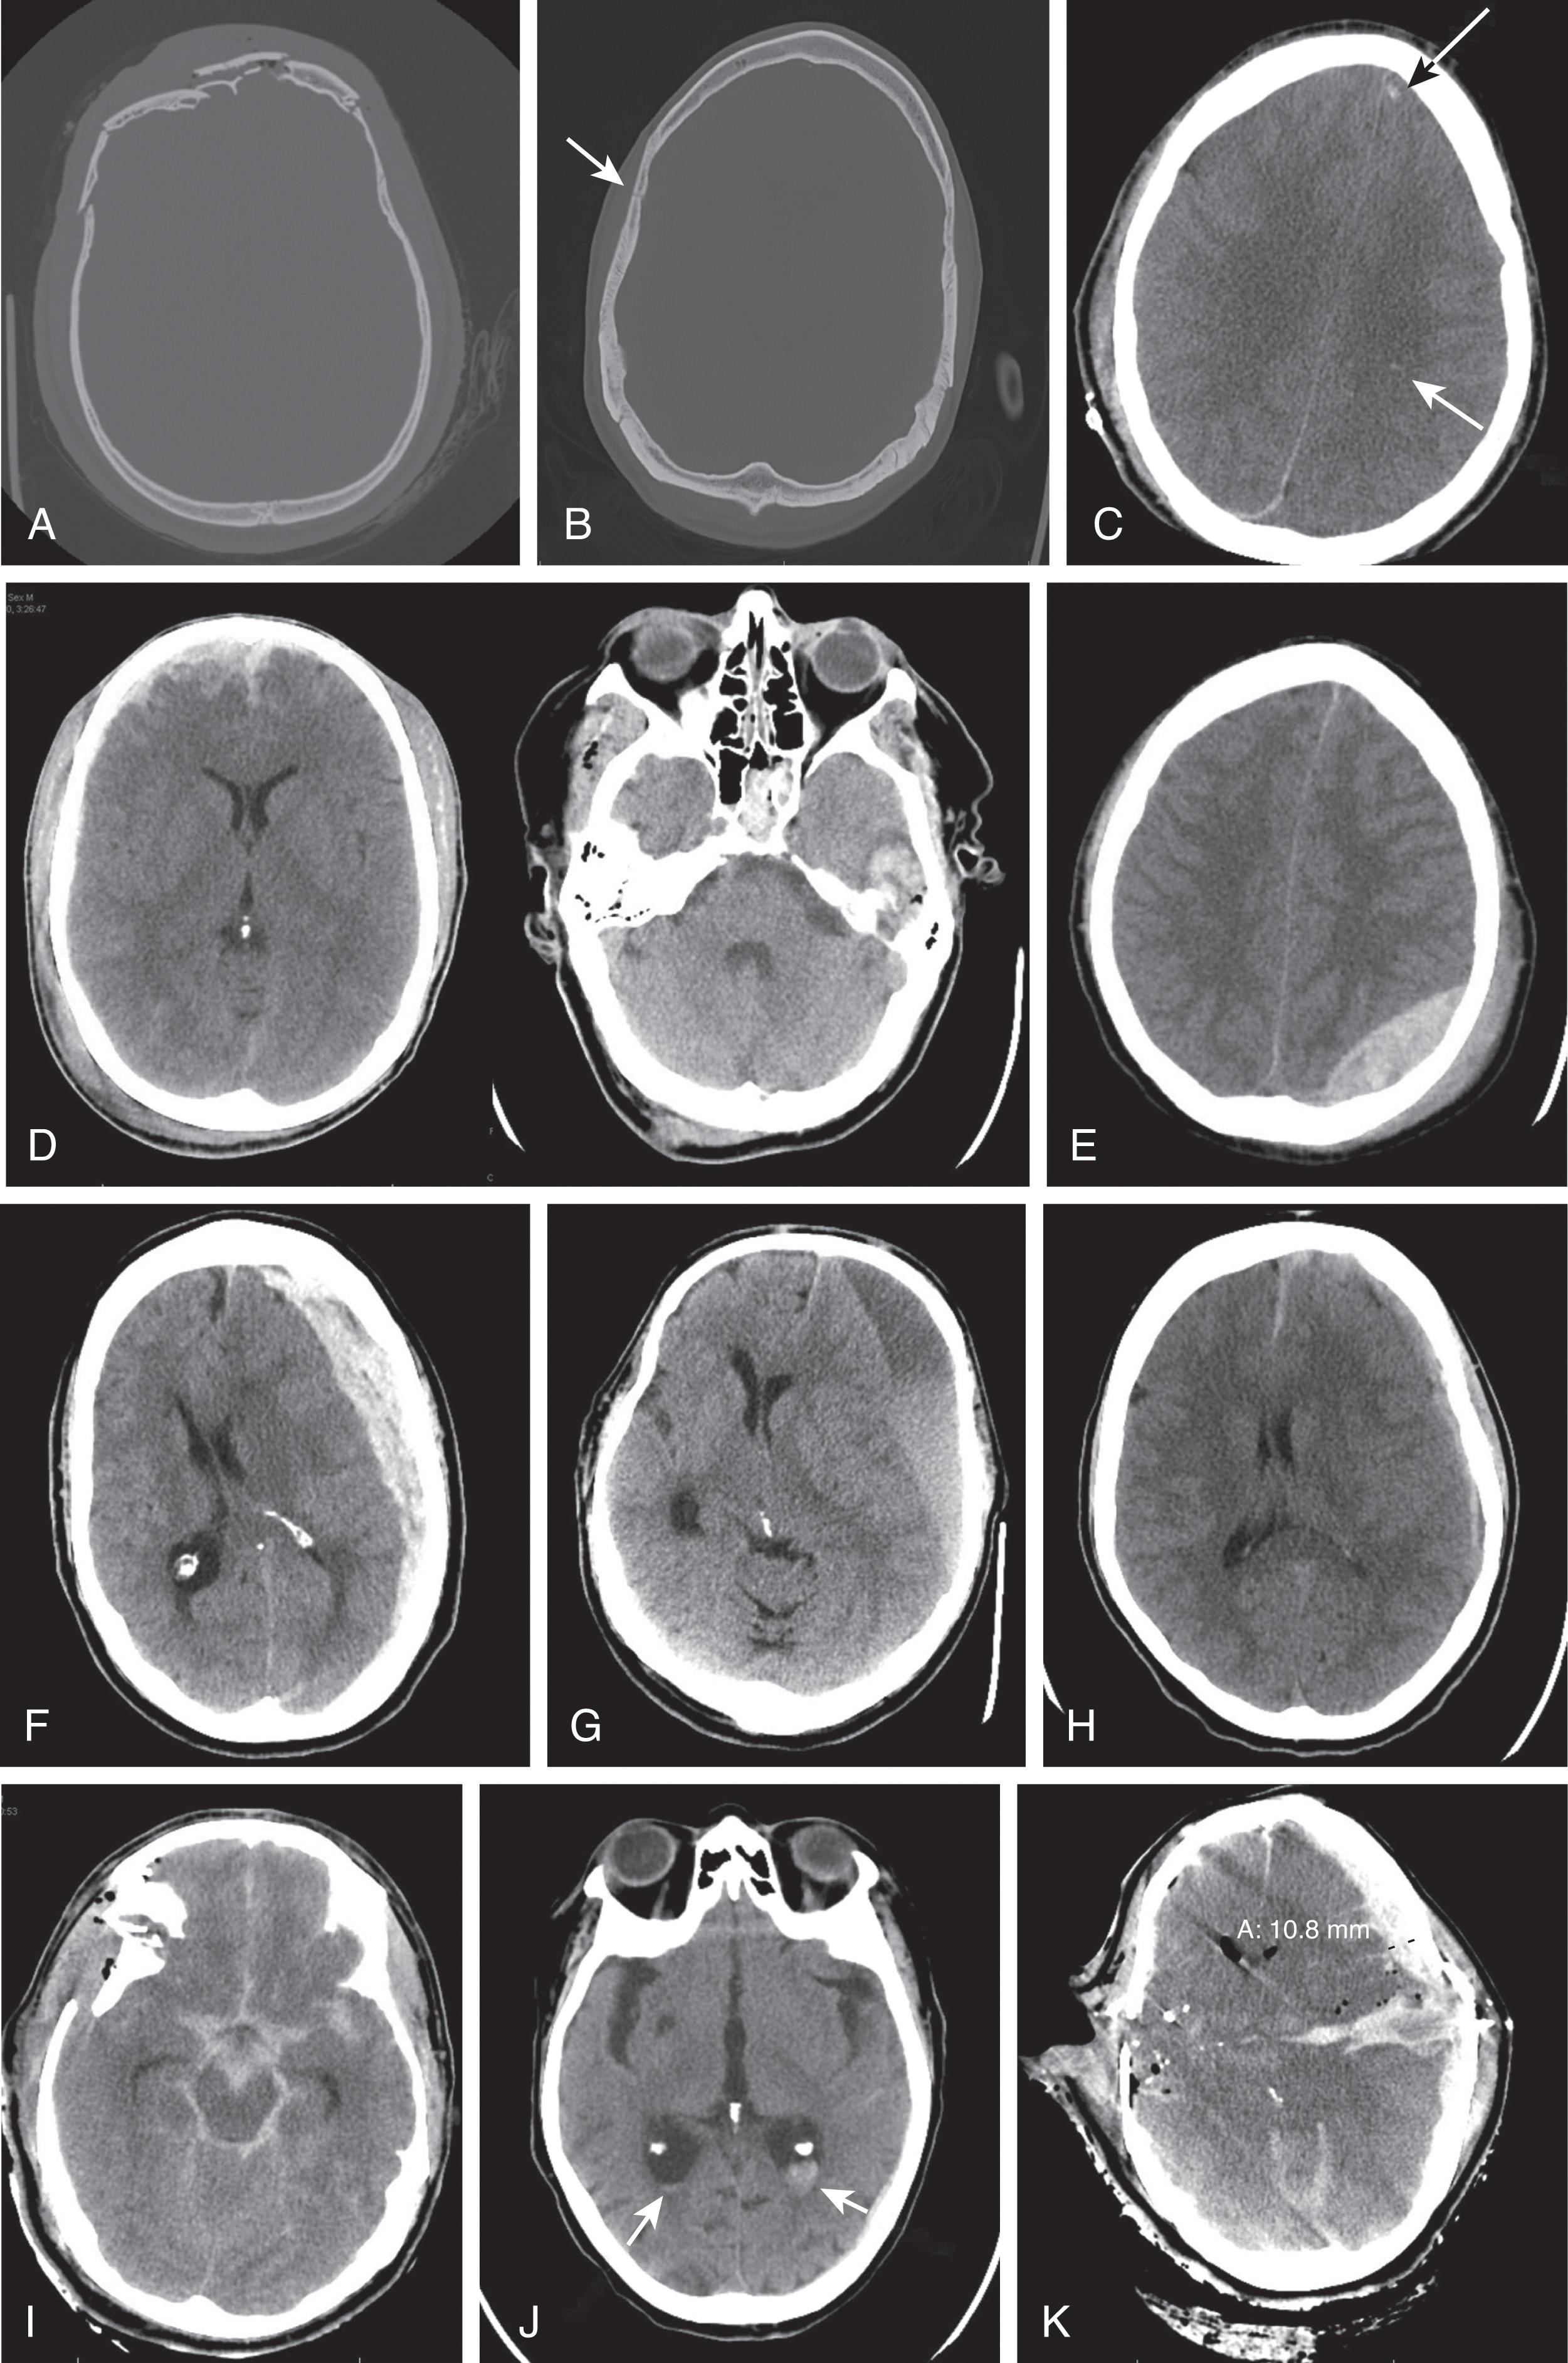 FIGURE 2, (A) Extensive fracture of the frontal bone and frontal sinus. (B) Fractures can sometimes be more subtle. (C) Diffuse axonal injury can sometimes be only represented on computed tomography by small punctate contusions due to the shearing of axons. Significant edema can be present. (D) Contusions frequently occur in the frontal and temporal regions from the brain striking the bone. (E) Epidural hematoma with typical lenticular shape. (F) Large acute subdural hemorrhage (SDH) with midline shift. Although size and extent of midline shift are important, the prognosis may still differ significantly between patients. (G) A large acute on chronic SDH in a patient with a large amount of midline shift, but due to the slower development and brain atrophy present, this patient presented only with headaches and mild weakness. This is contrasted by (H) a younger patient with a smaller SDH but with a very poor Glasgow Coma Scale on arrival. (I) Large amount of subarachnoid hemorrhage layering in the basilar cisterns. (J) Small amount of intraventricular hemorrhage layering in the ventricle. (K) Computed tomography demonstrating a penetrating injury from a gunshot wound.